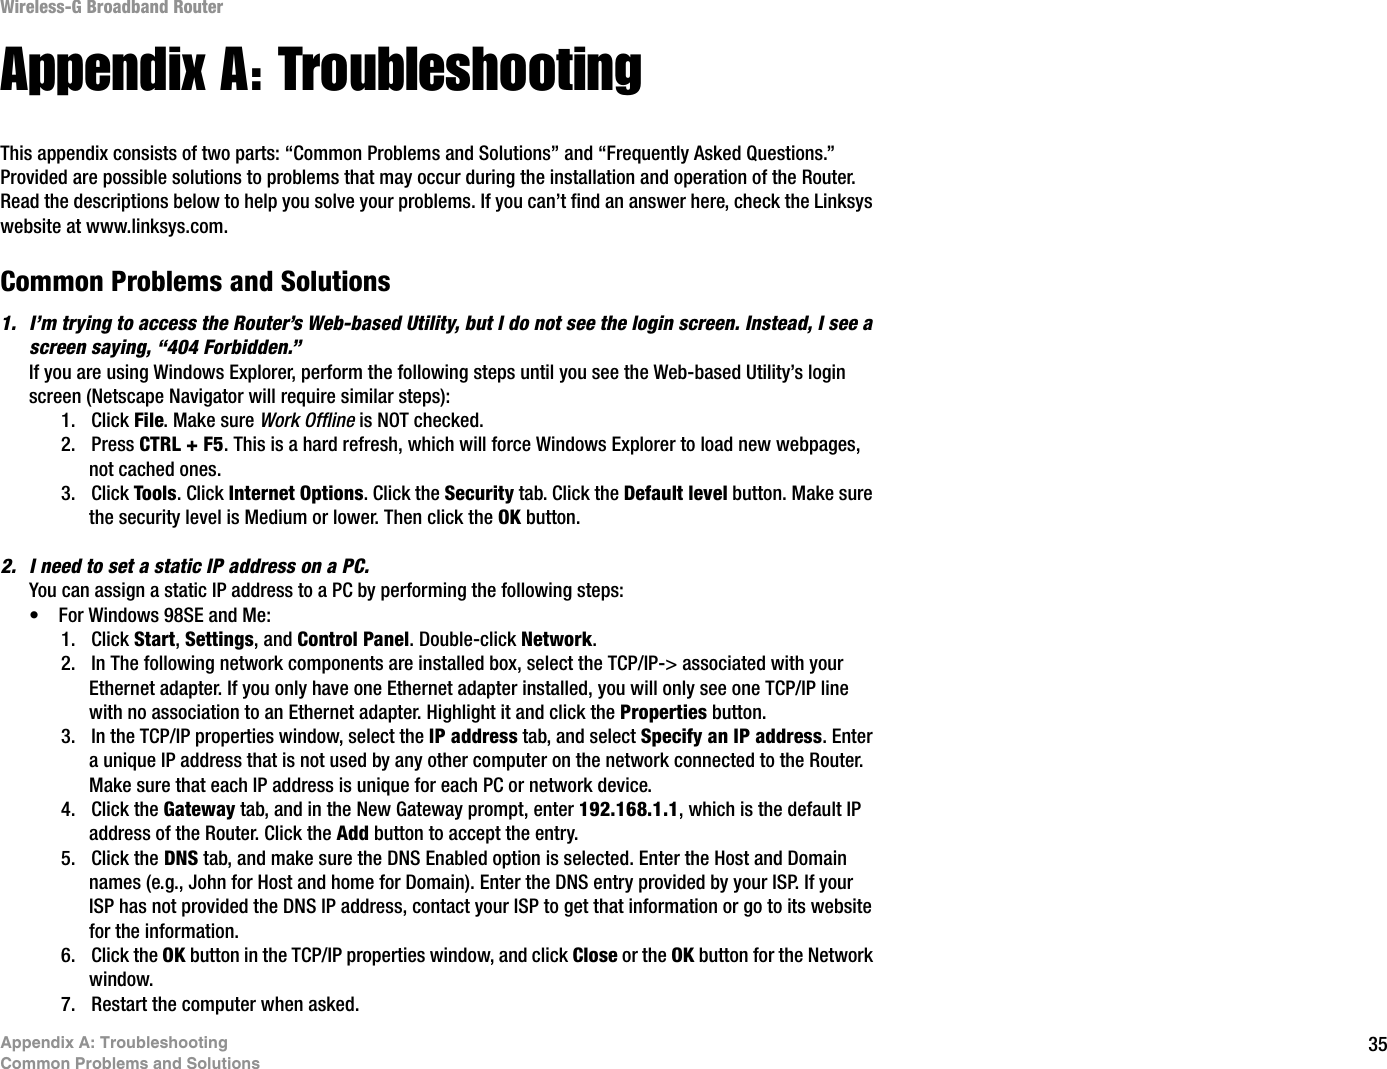 35Appendix A: TroubleshootingCommon Problems and SolutionsWireless-G Broadband RouterAppendix A: TroubleshootingThis appendix consists of two parts: “Common Problems and Solutions” and “Frequently Asked Questions.” Provided are possible solutions to problems that may occur during the installation and operation of the Router. Read the descriptions below to help you solve your problems. If you can’t find an answer here, check the Linksys website at www.linksys.com.Common Problems and Solutions1. I’m trying to access the Router’s Web-based Utility, but I do not see the login screen. Instead, I see a screen saying, “404 Forbidden.”If you are using Windows Explorer, perform the following steps until you see the Web-based Utility’s login screen (Netscape Navigator will require similar steps):1. Click File. Make sure Work Offline is NOT checked.2. Press CTRL + F5. This is a hard refresh, which will force Windows Explorer to load new webpages, not cached ones.3. Click Tools. Click Internet Options. Click the Security tab. Click the Default level button. Make sure the security level is Medium or lower. Then click the OK button.2. I need to set a static IP address on a PC.You can assign a static IP address to a PC by performing the following steps:• For Windows 98SE and Me:1. Click Start,Settings, and Control Panel. Double-click Network.2. In The following network components are installed box, select the TCP/IP-&gt; associated with your Ethernet adapter. If you only have one Ethernet adapter installed, you will only see one TCP/IP line with no association to an Ethernet adapter. Highlight it and click the Properties button.3. In the TCP/IP properties window, select the IP address tab, and select Specify an IP address. Enter a unique IP address that is not used by any other computer on the network connected to the Router. Make sure that each IP address is unique for each PC or network device.4. Click the Gateway tab, and in the New Gateway prompt, enter 192.168.1.1, which is the default IP address of the Router. Click the Add button to accept the entry.5. Click the DNS tab, and make sure the DNS Enabled option is selected. Enter the Host and Domain names (e.g., John for Host and home for Domain). Enter the DNS entry provided by your ISP. If your ISP has not provided the DNS IP address, contact your ISP to get that information or go to its website for the information.6. Click the OK button in the TCP/IP properties window, and click Close or the OK button for the Network window.7. Restart the computer when asked.